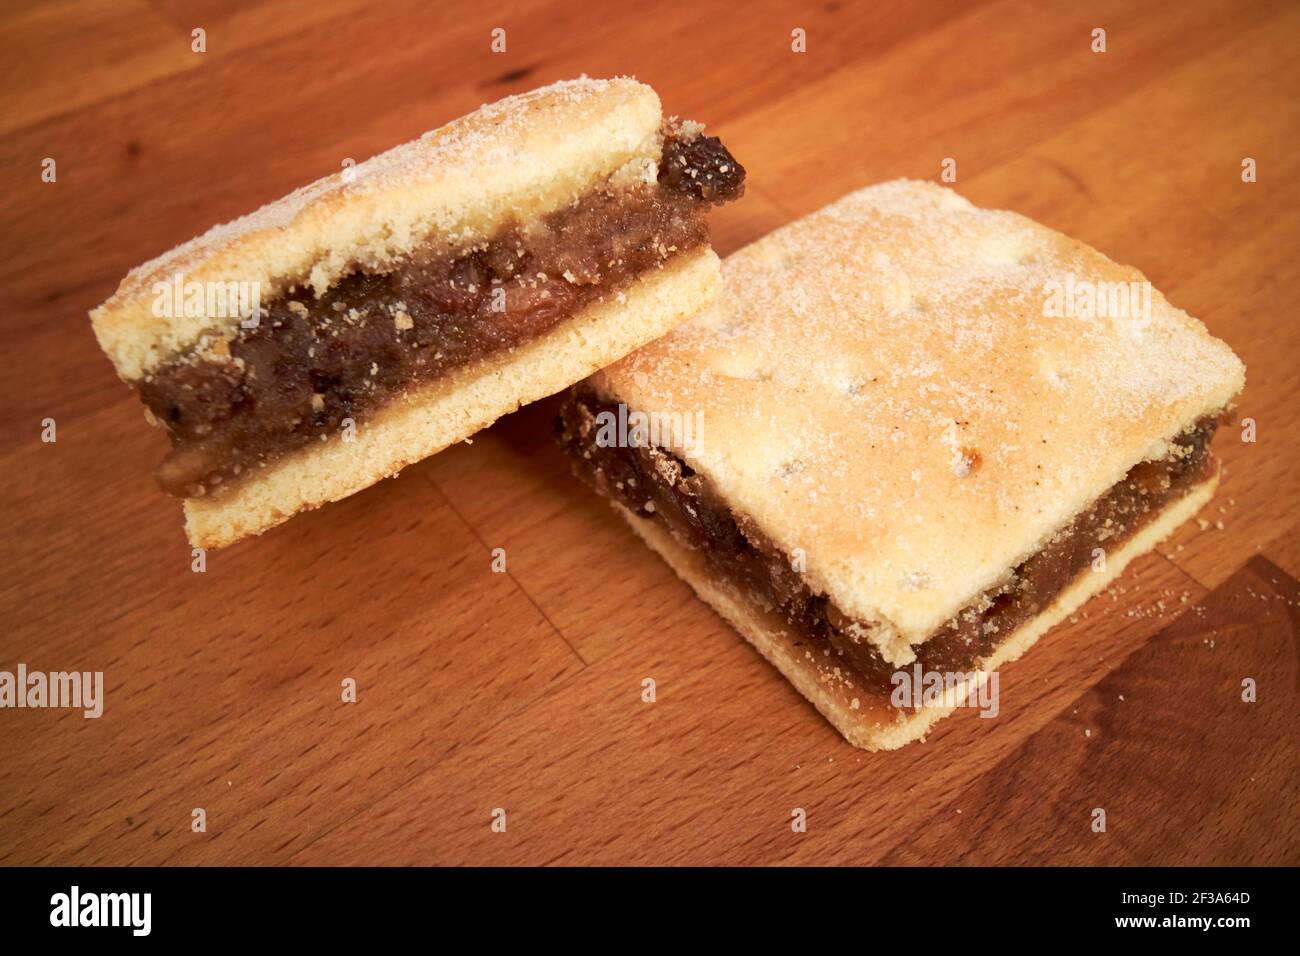 currant squares northern irish traditional sweet cake known locally as 'flies graveyard' or fly cemetary in scotland Stock Photo